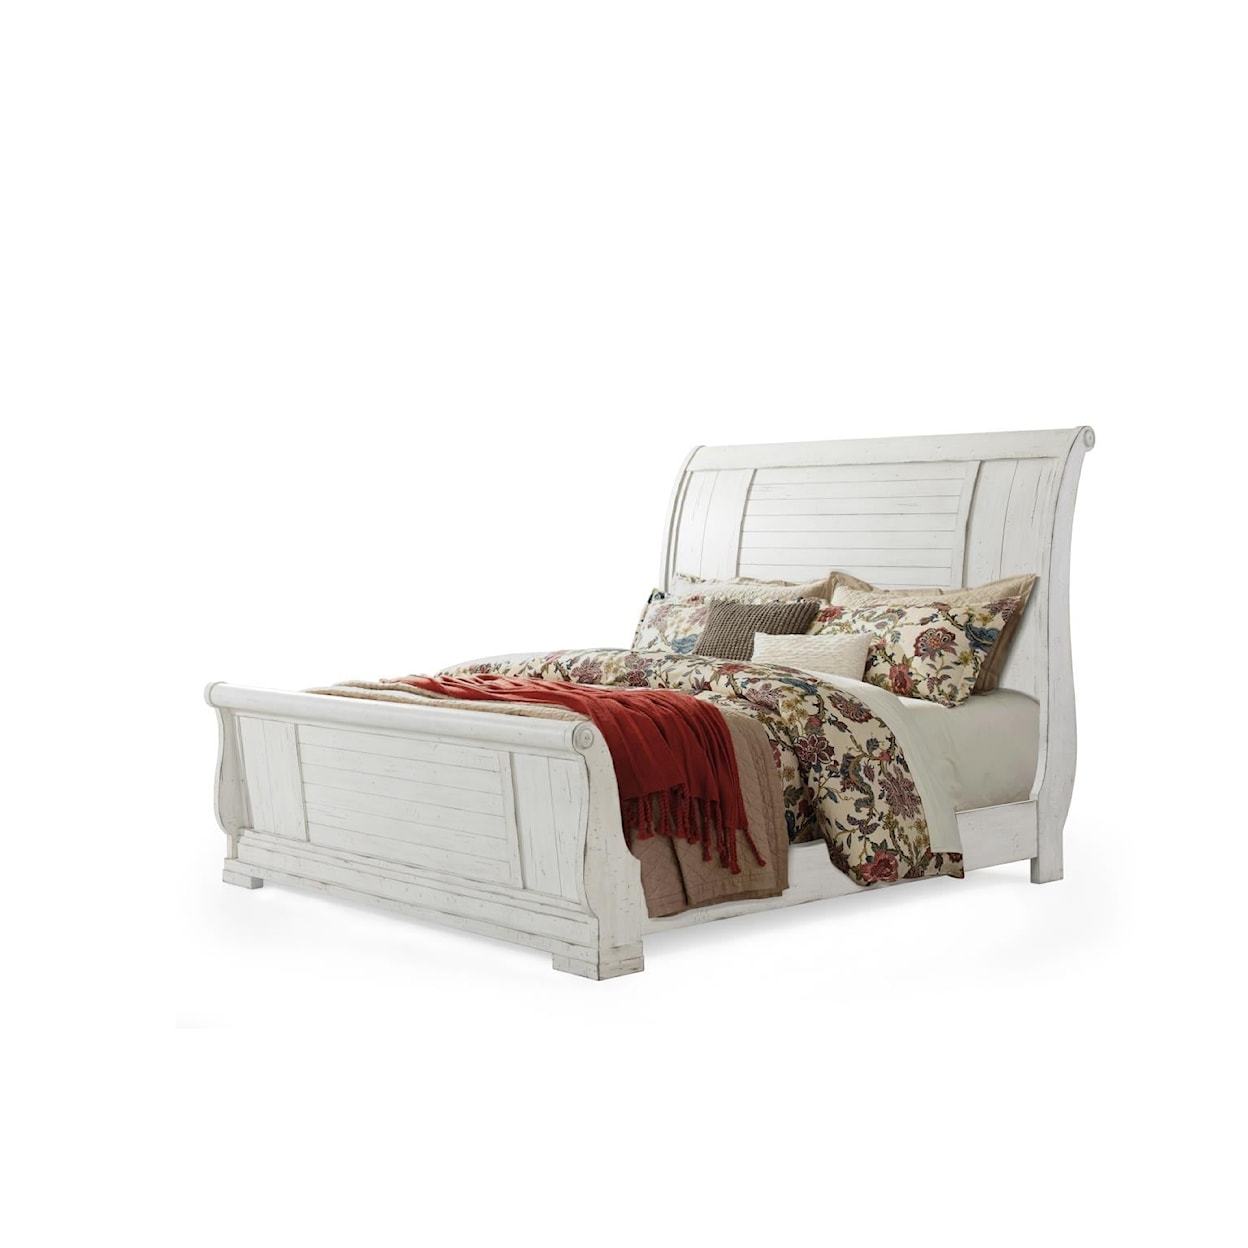 Trisha Yearwood Home Collection by Legacy Classic Coming Home King Sleigh Bed